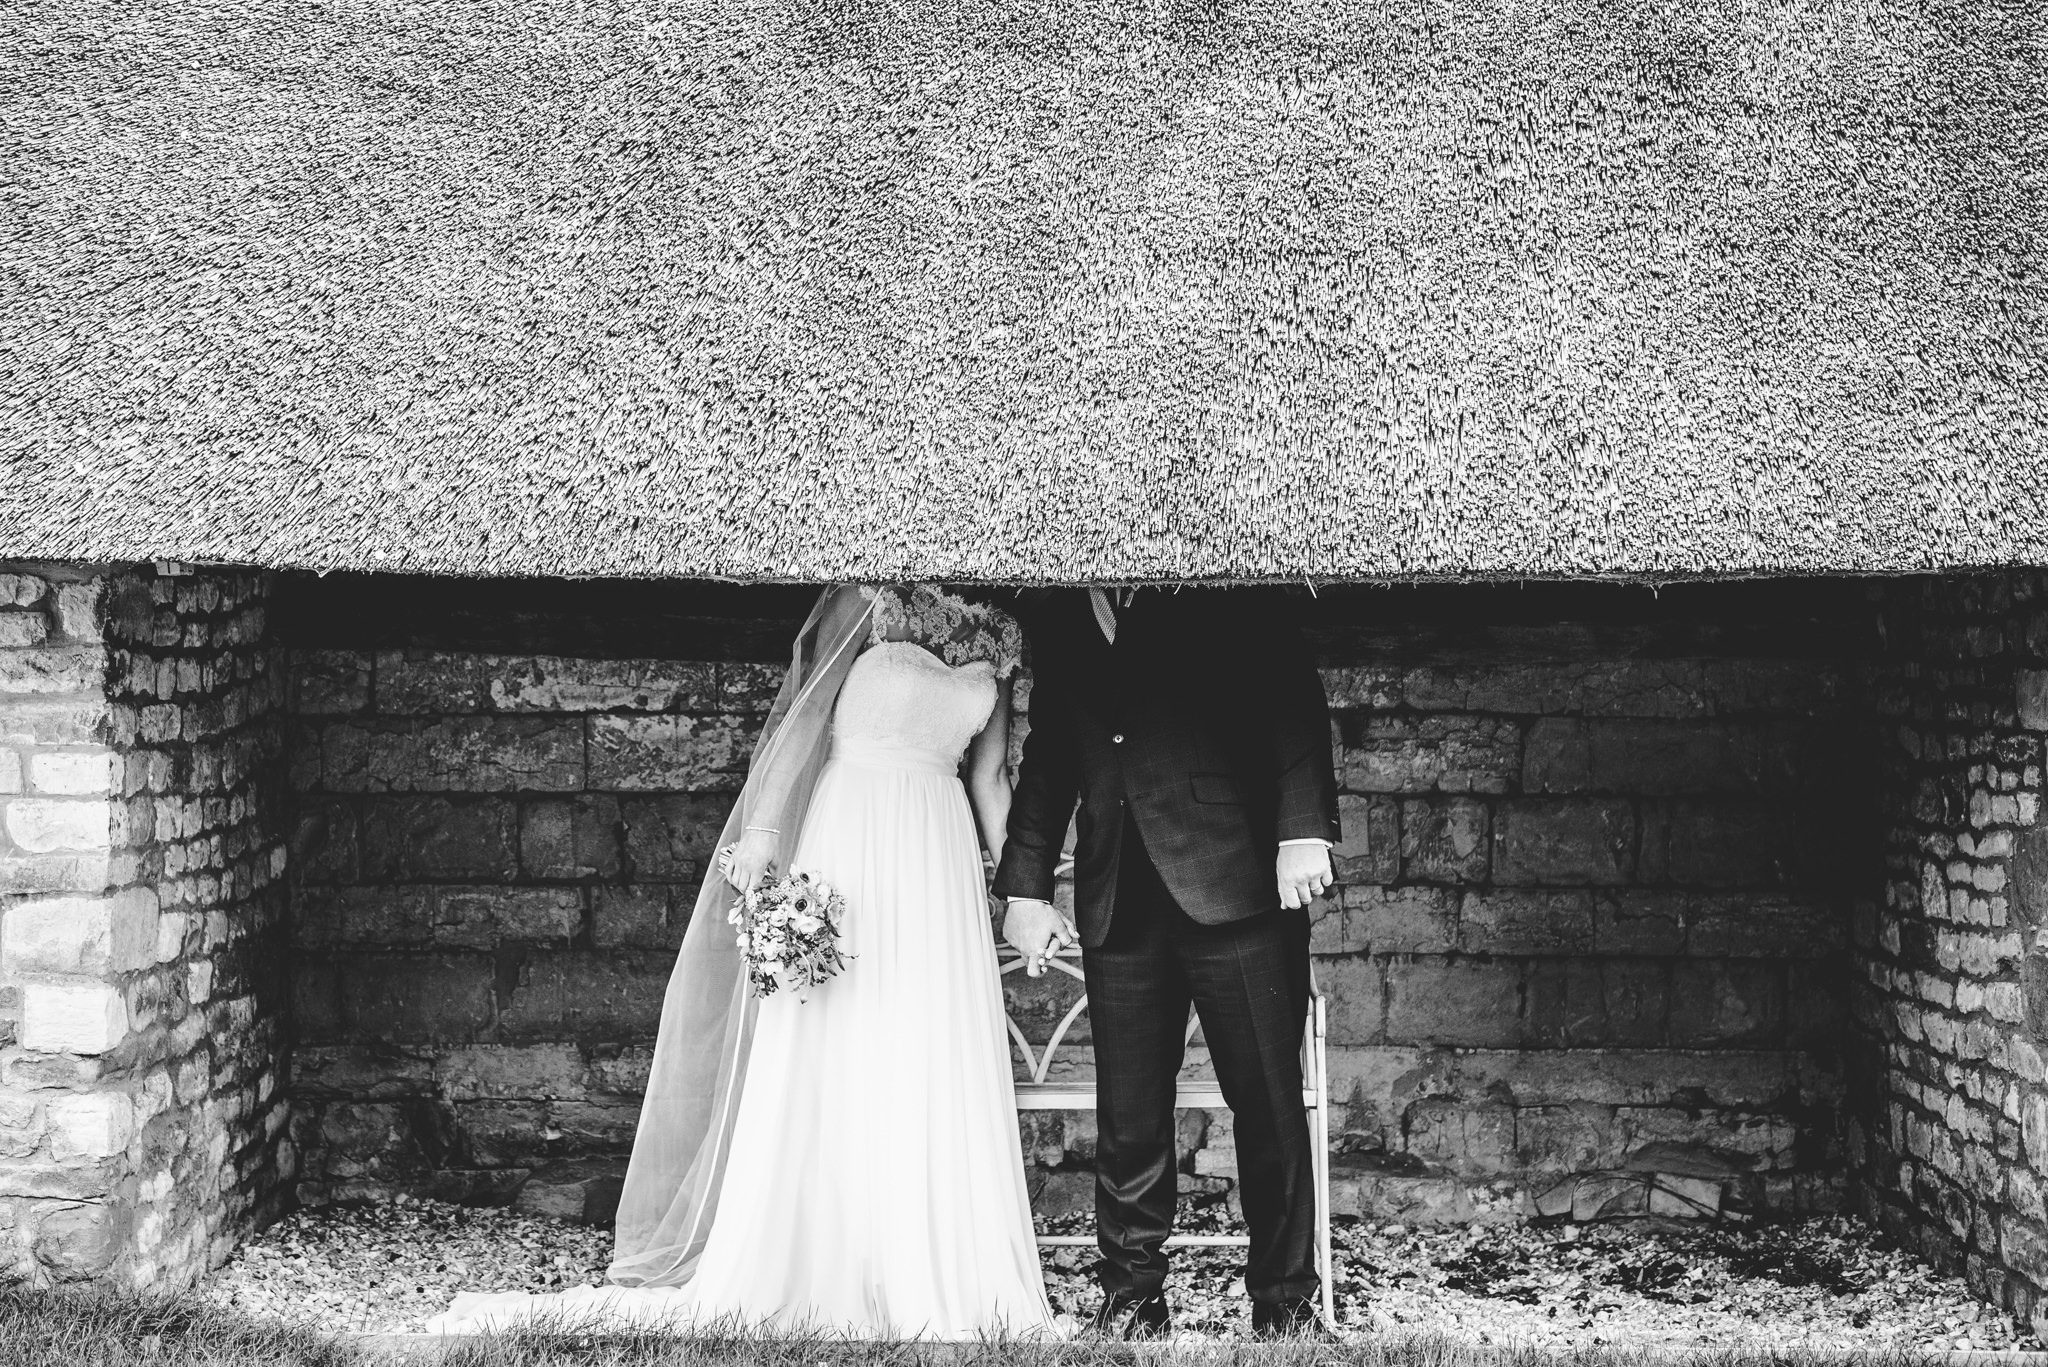 Bride and groom hiding behind a thatched roof